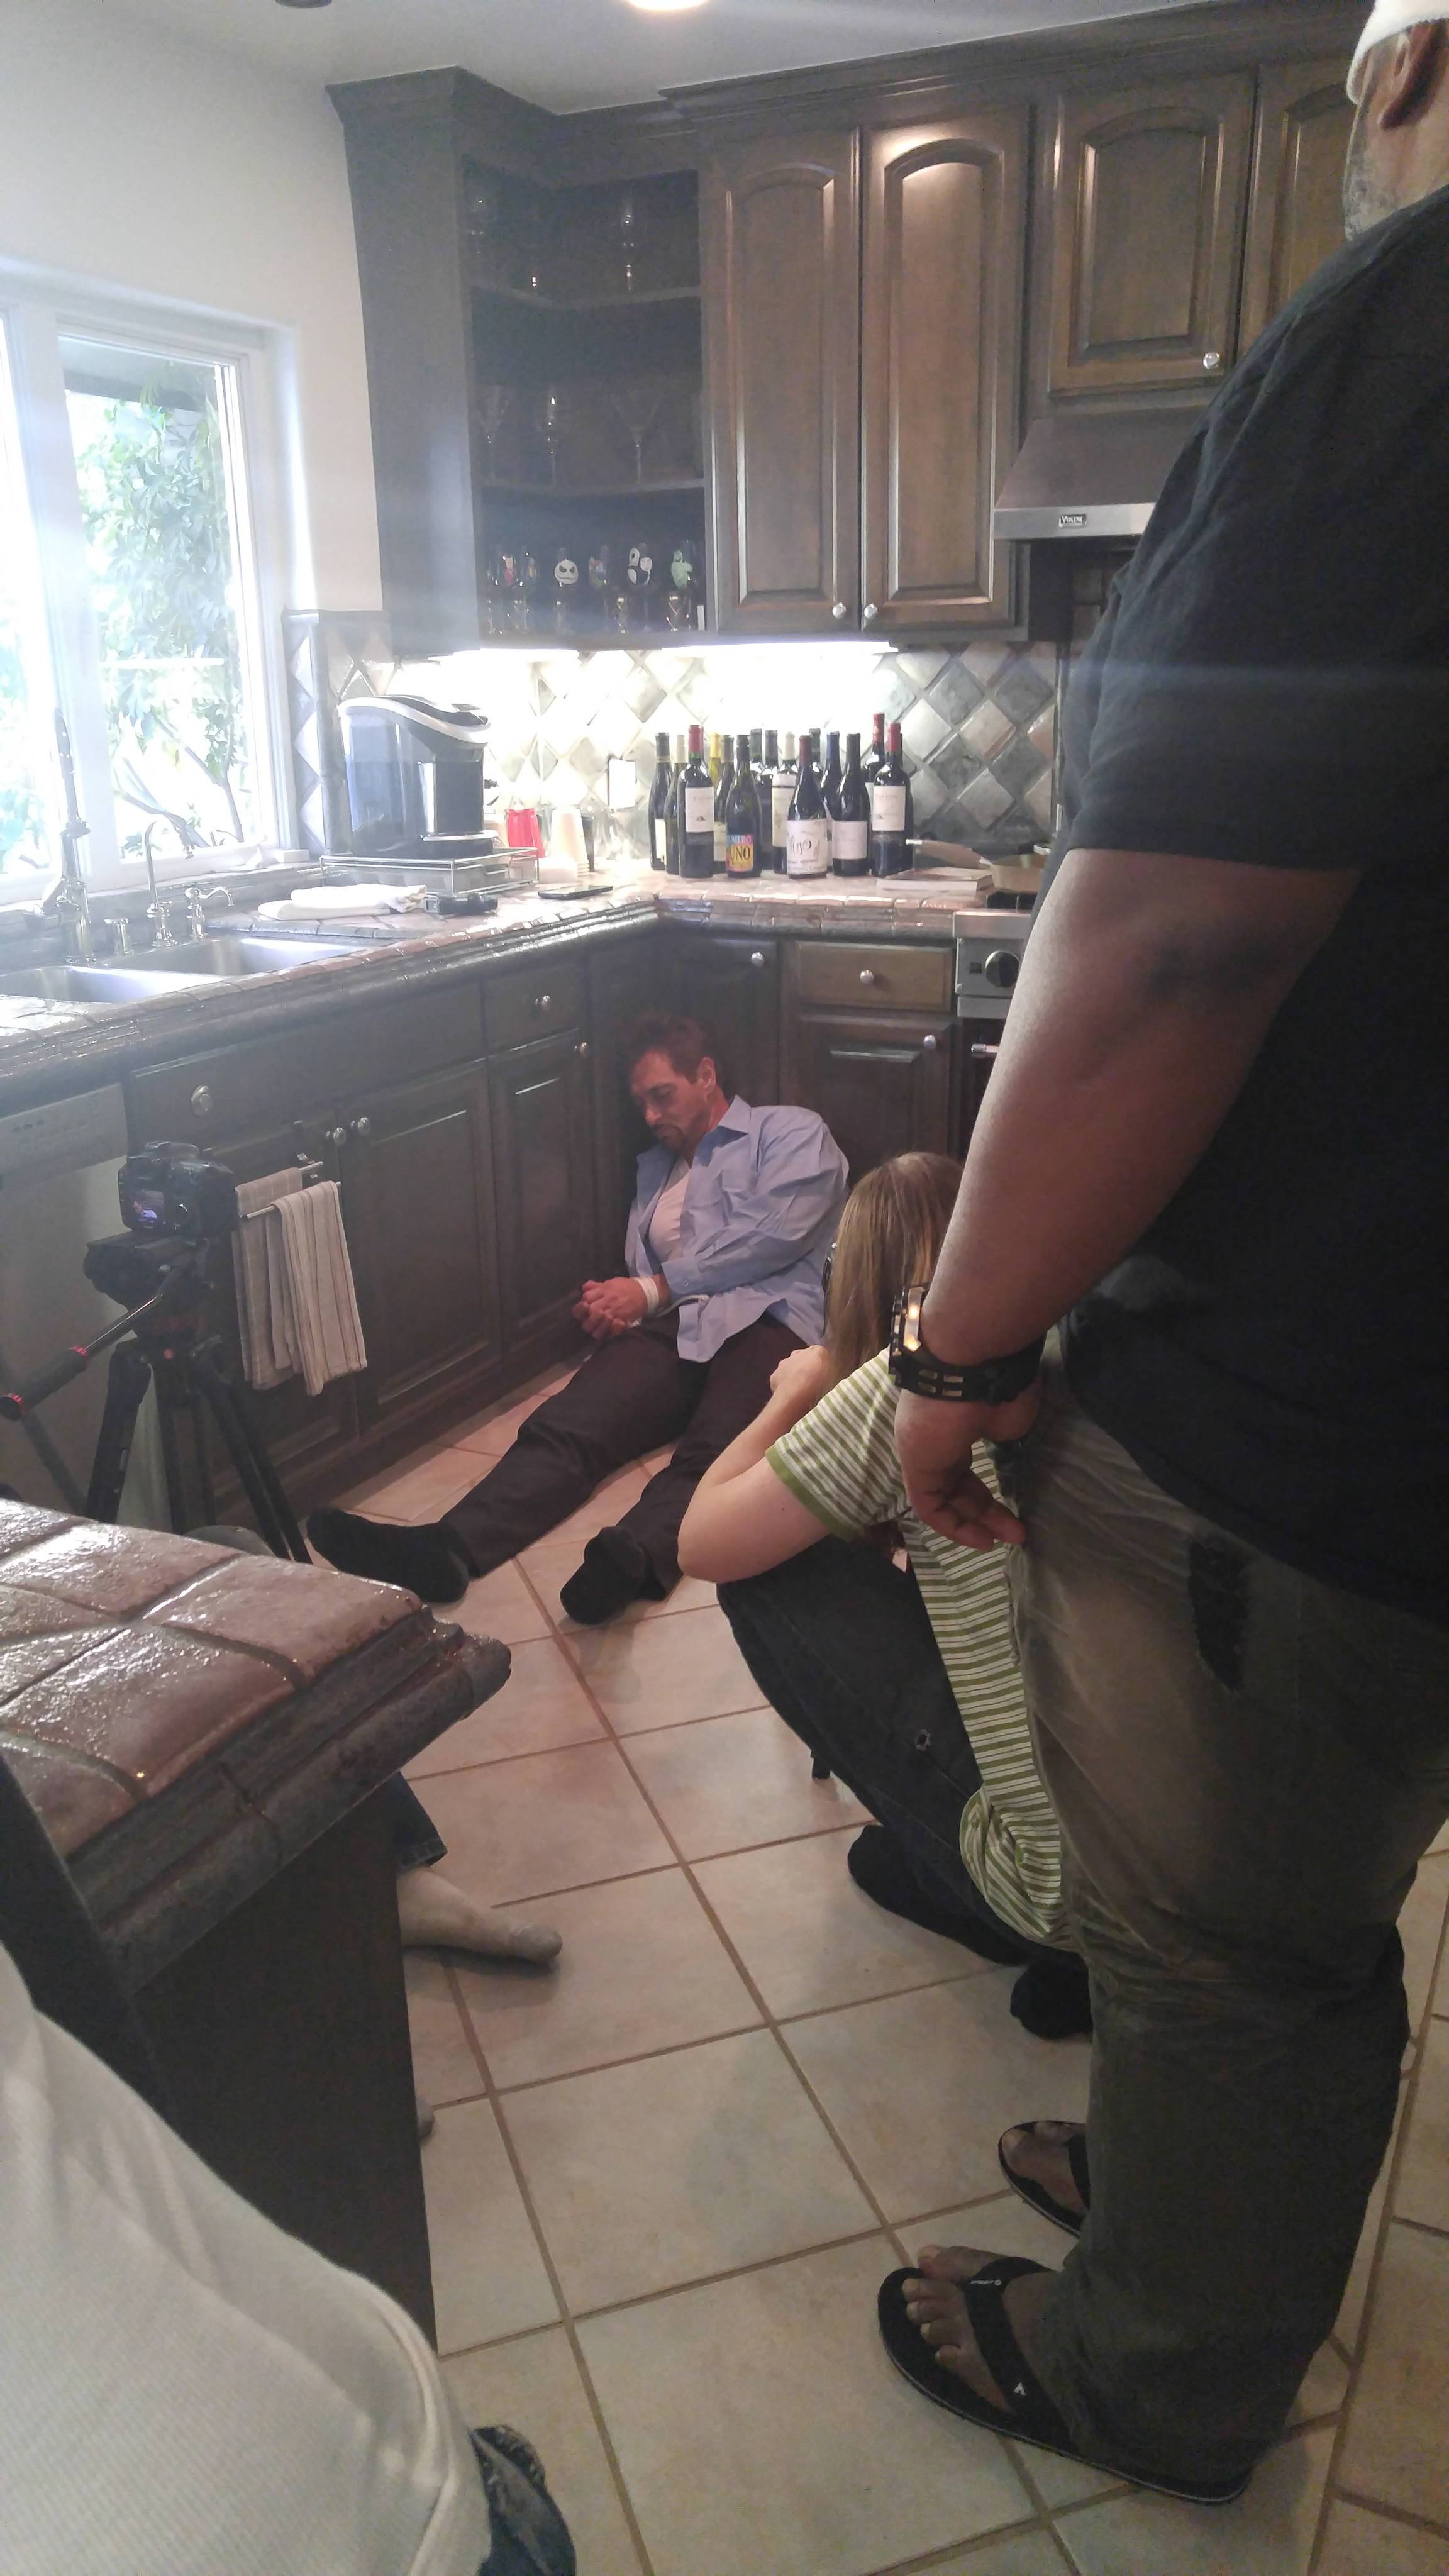 On set of feature film. I get beat up pretty bad. So fun.